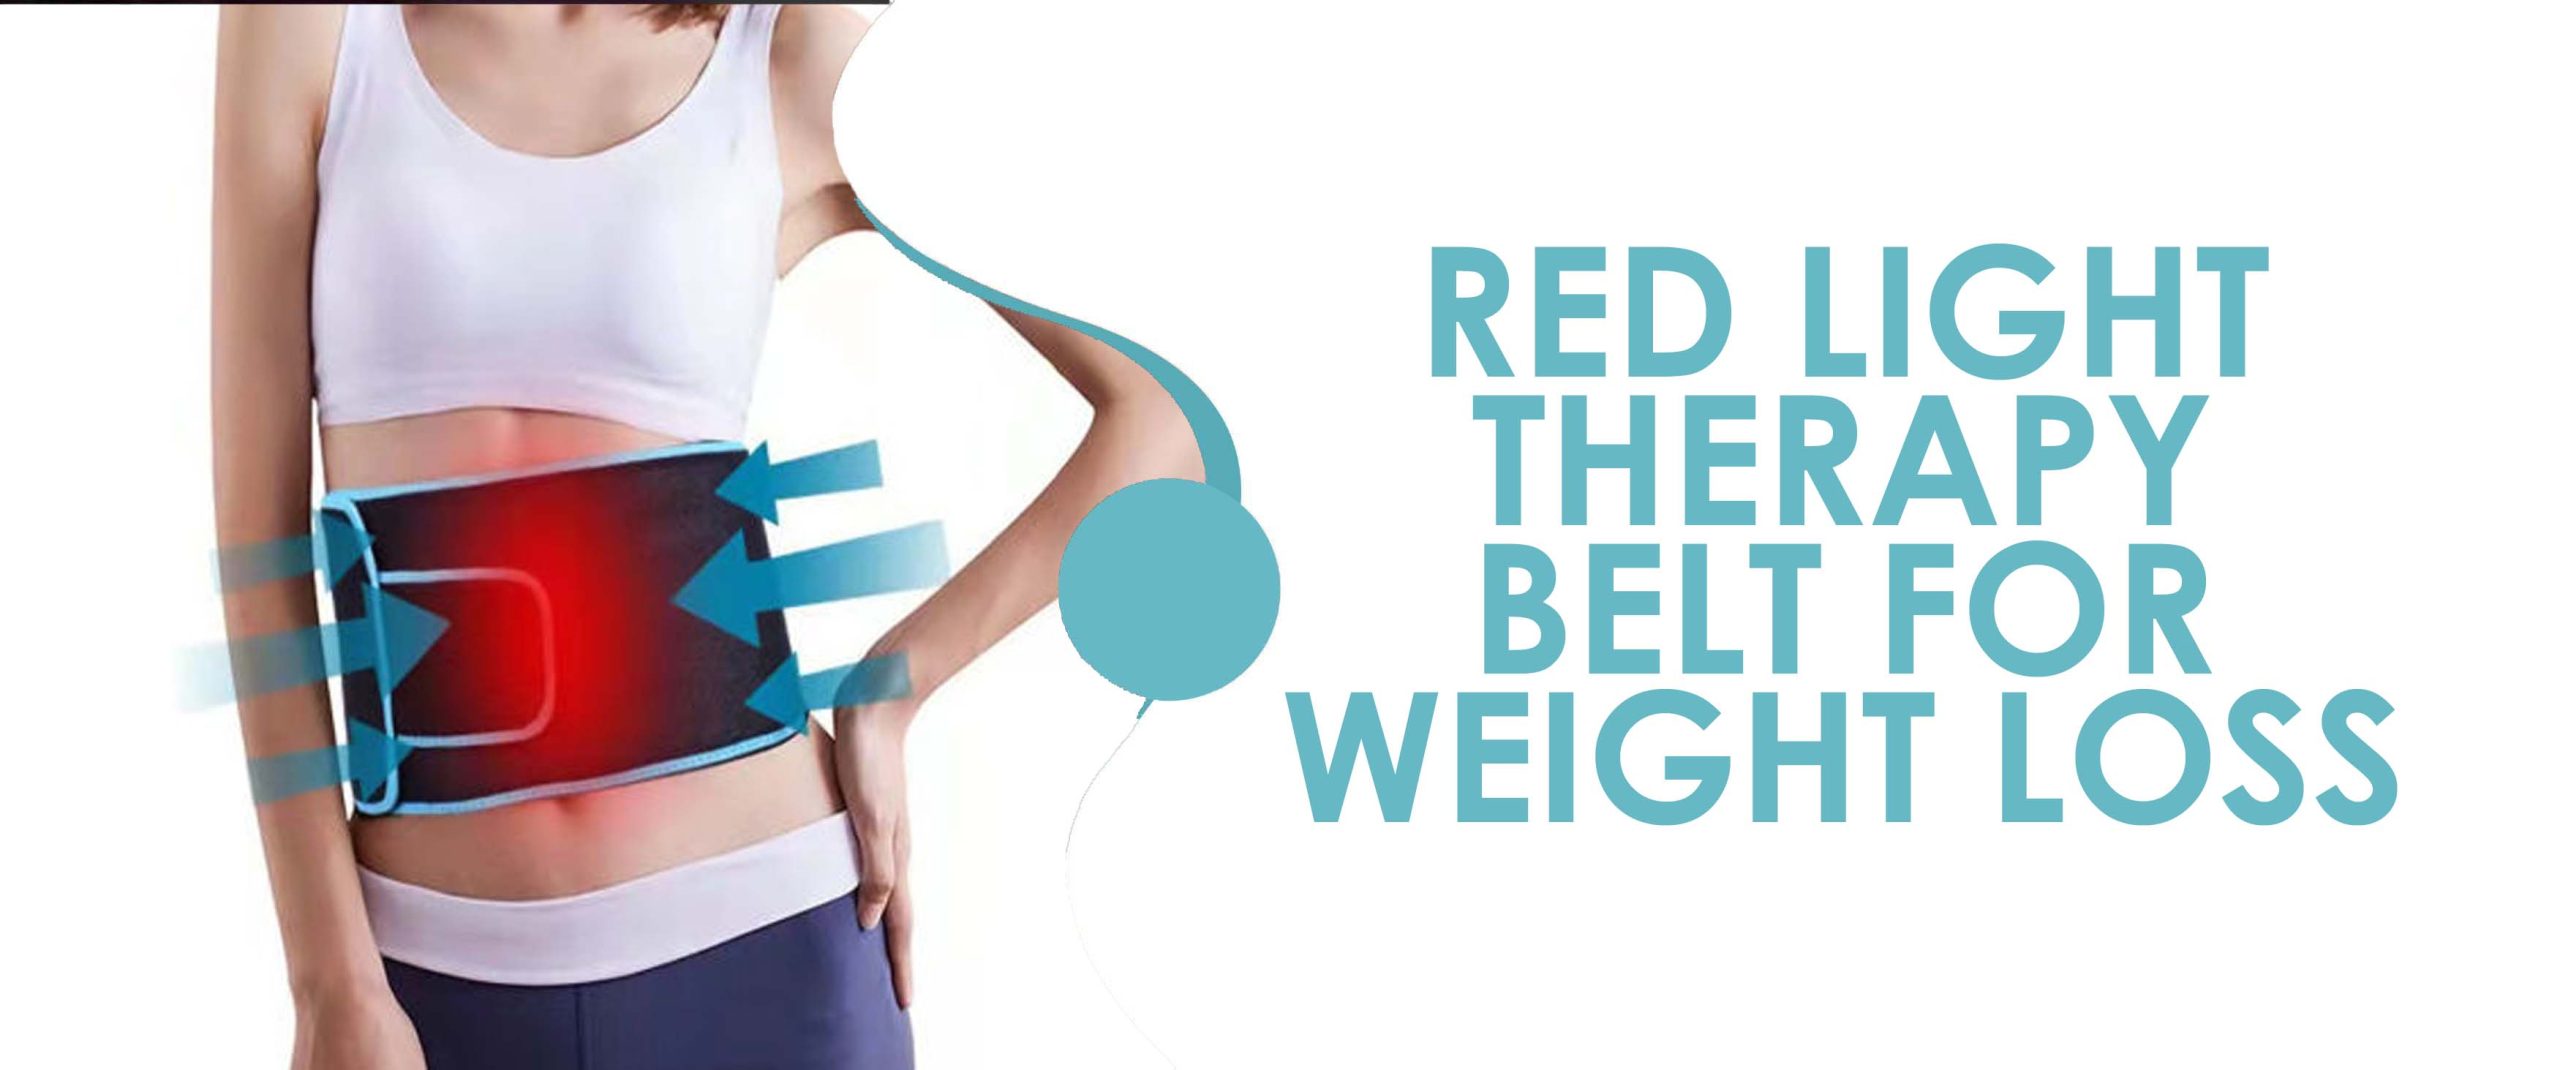 Red Light Therapy Belt For Weight Loss